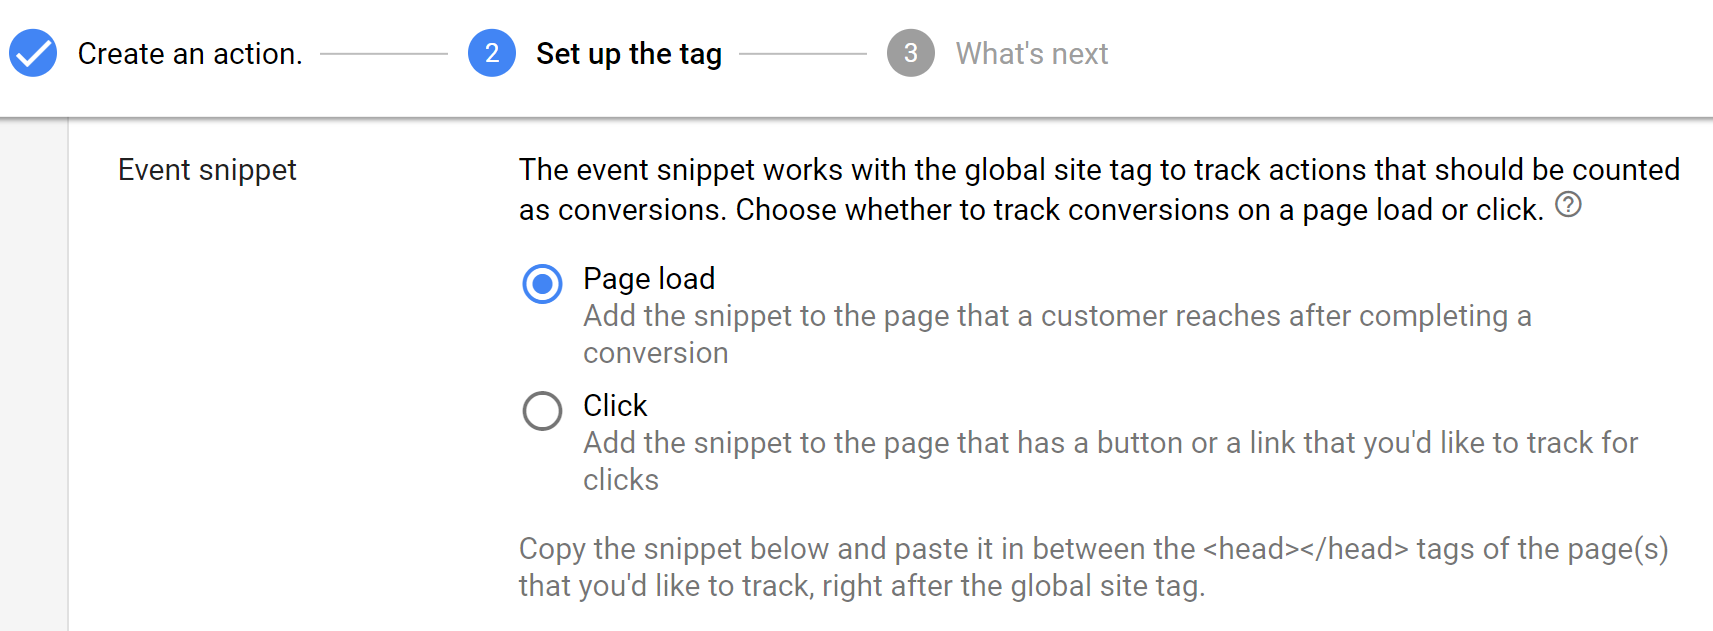 The event snippet s typically used to record page loads and specific conversion events, such as product sales in our case.